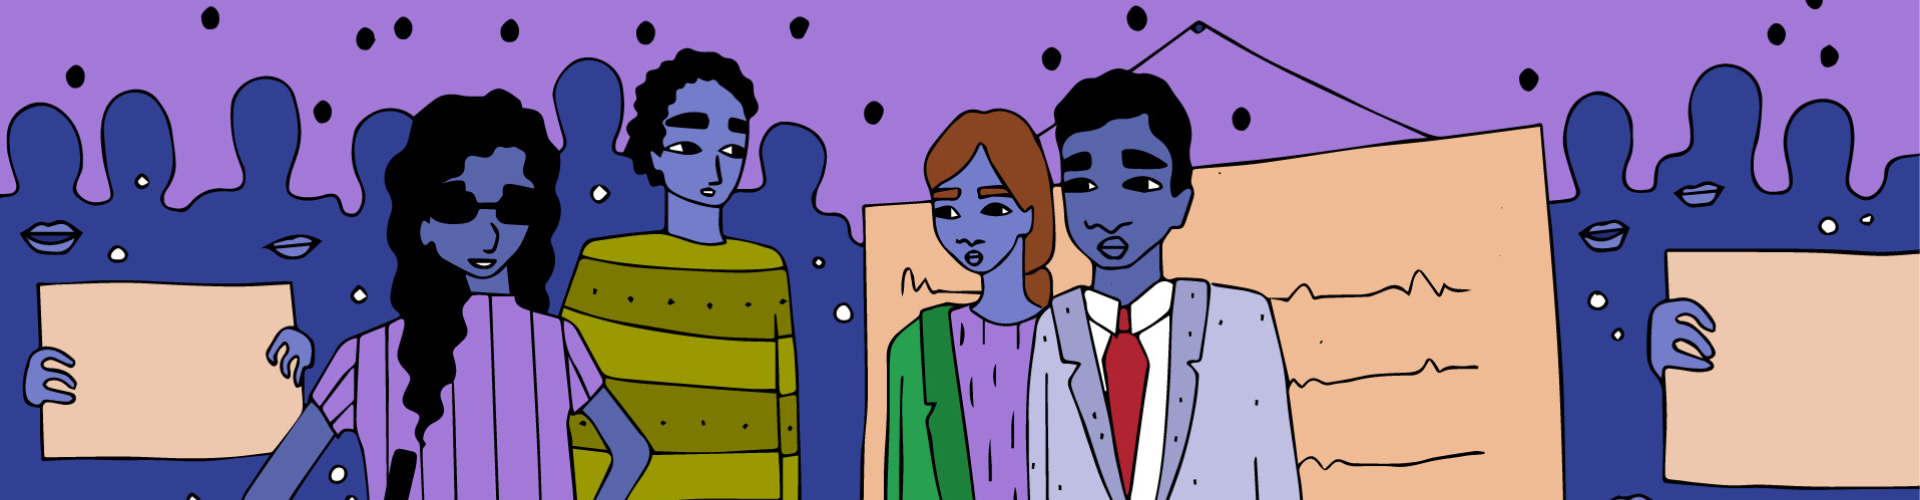 A colourful illustration of two LGBTQ+ employees discussing their rights with their employers. One of the employees is blind and has a mobility cane.